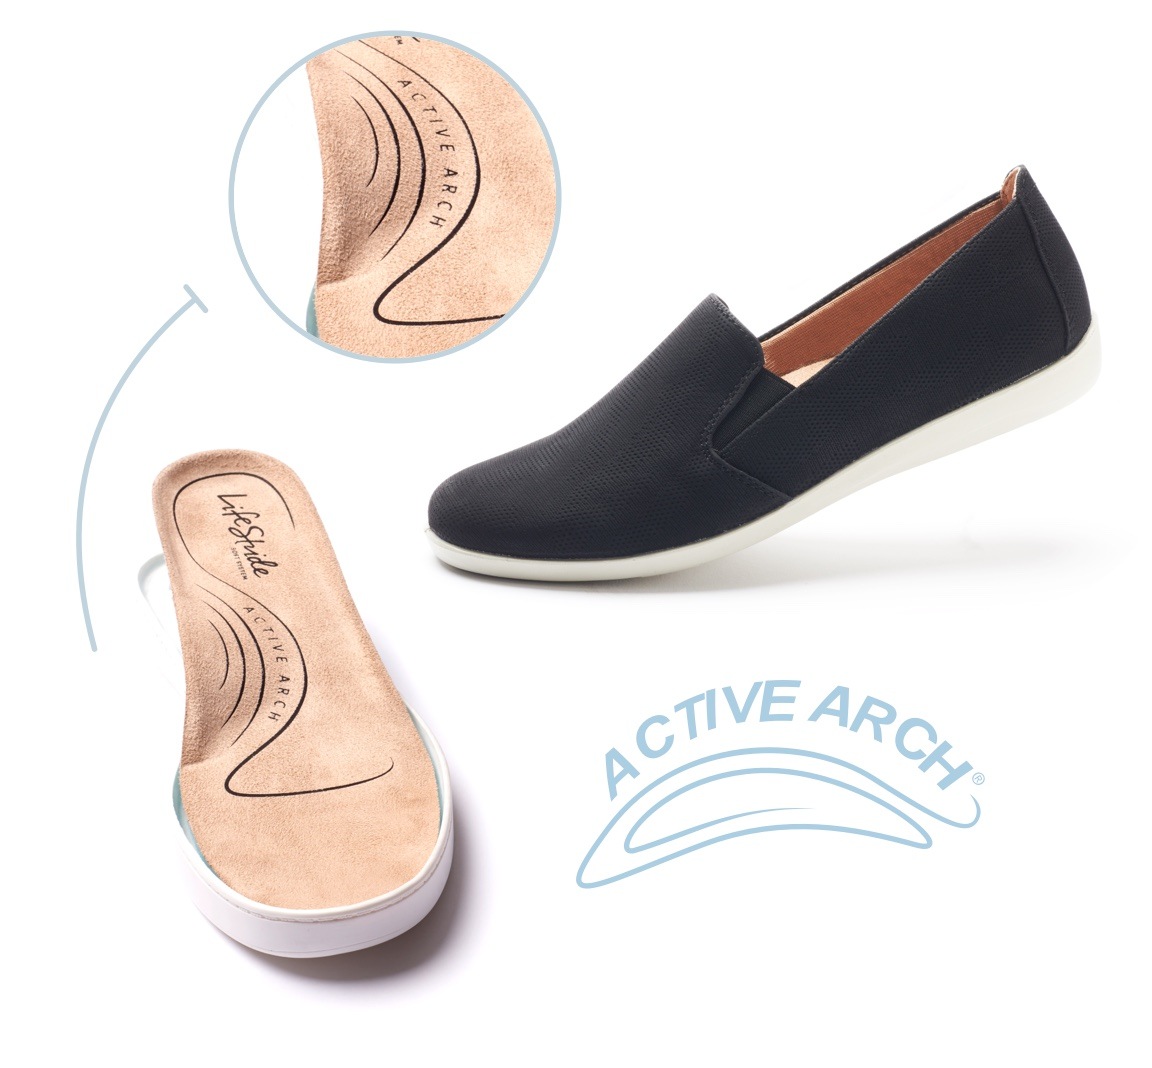 lifestyle velocity shoes with memory foam